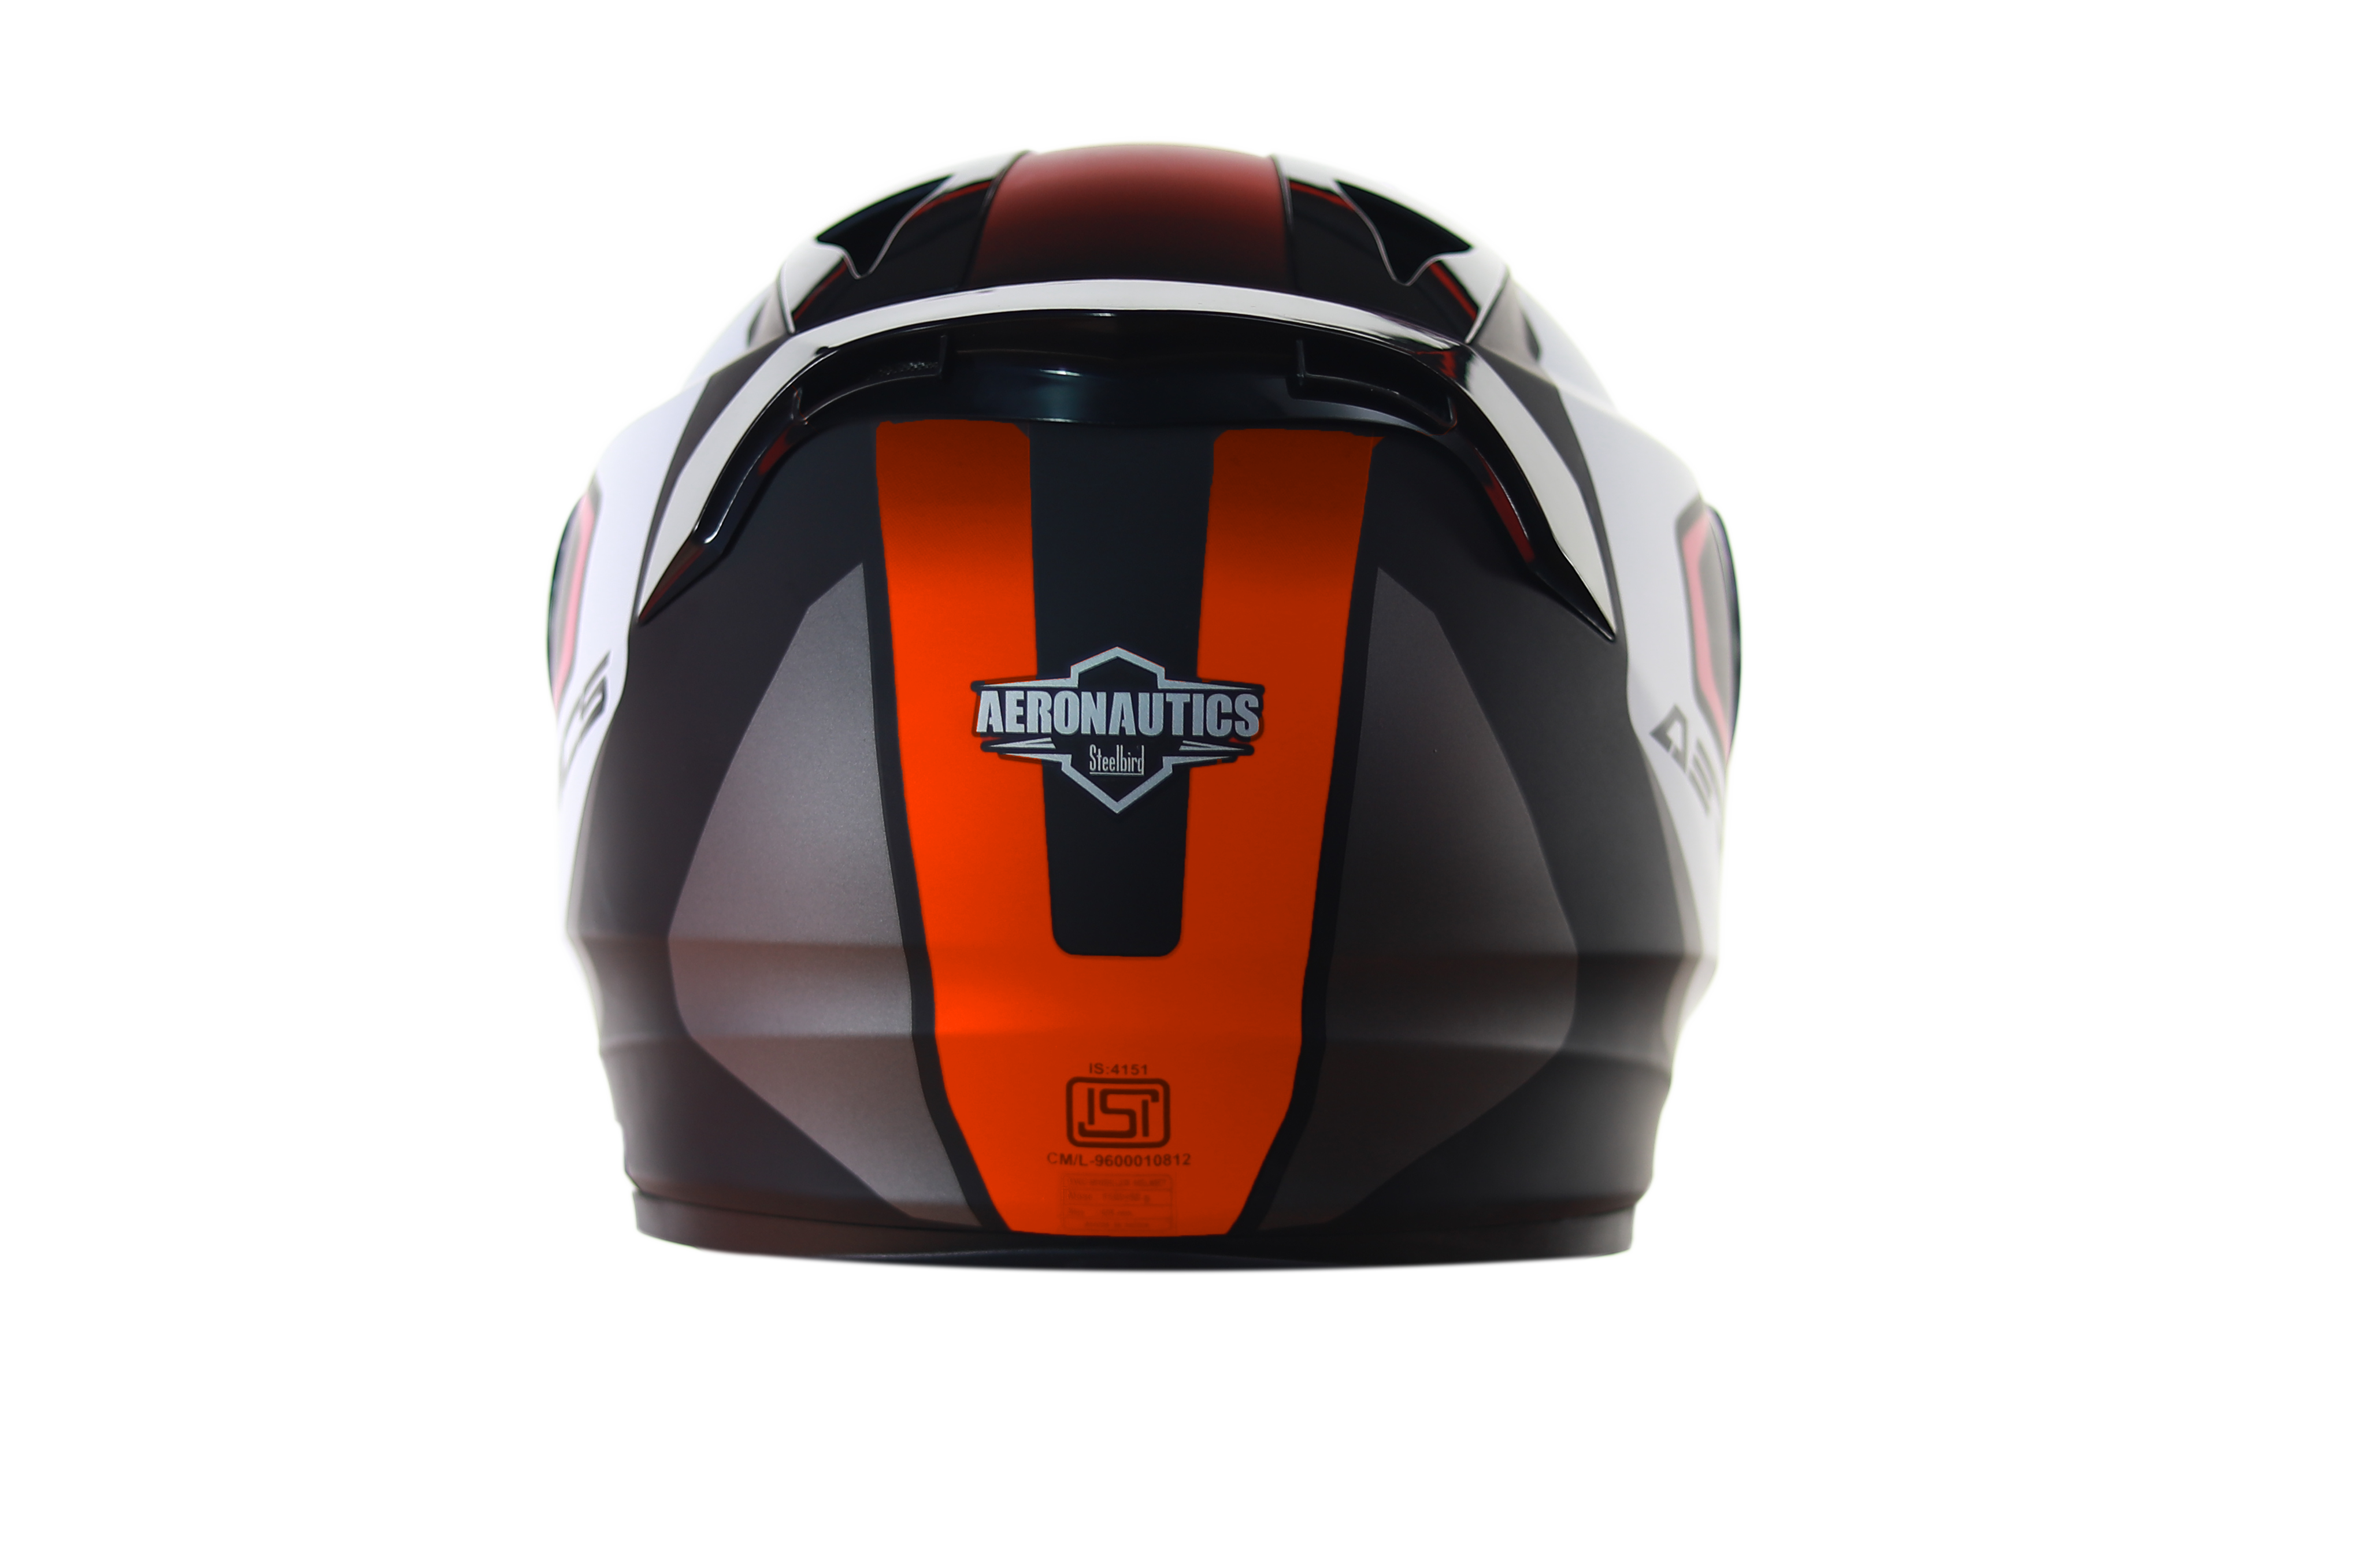 SA-1 Aerodynamics Mat Black With Orange(Fitted With Clear Visor Extra Blue Night Vision Visor Free)